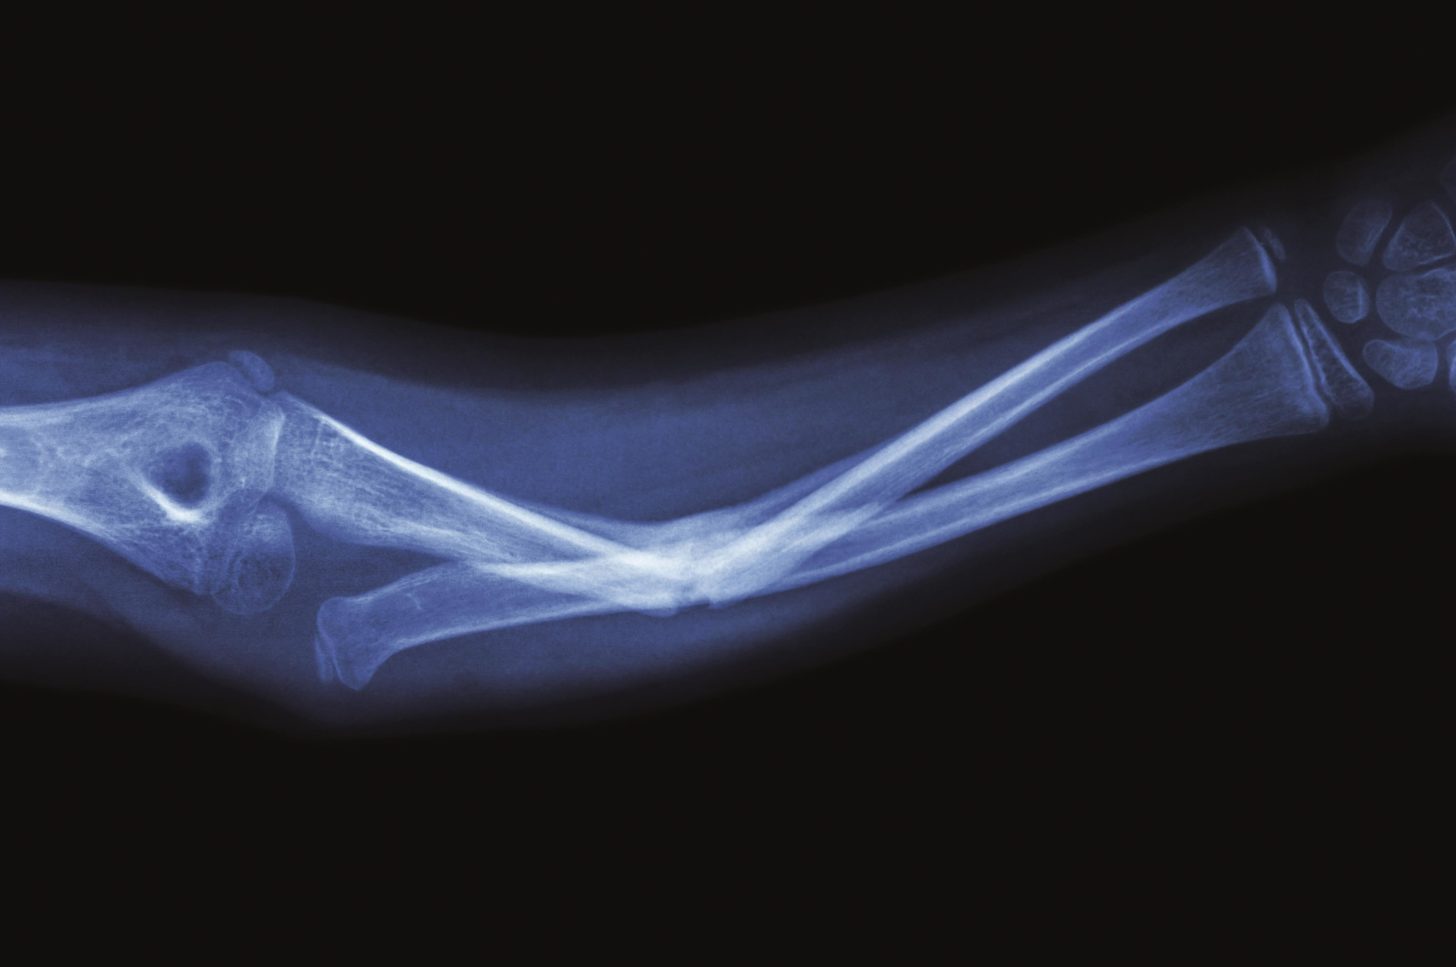 FDA strengthens fracture warnings for canagliflozin - The ...